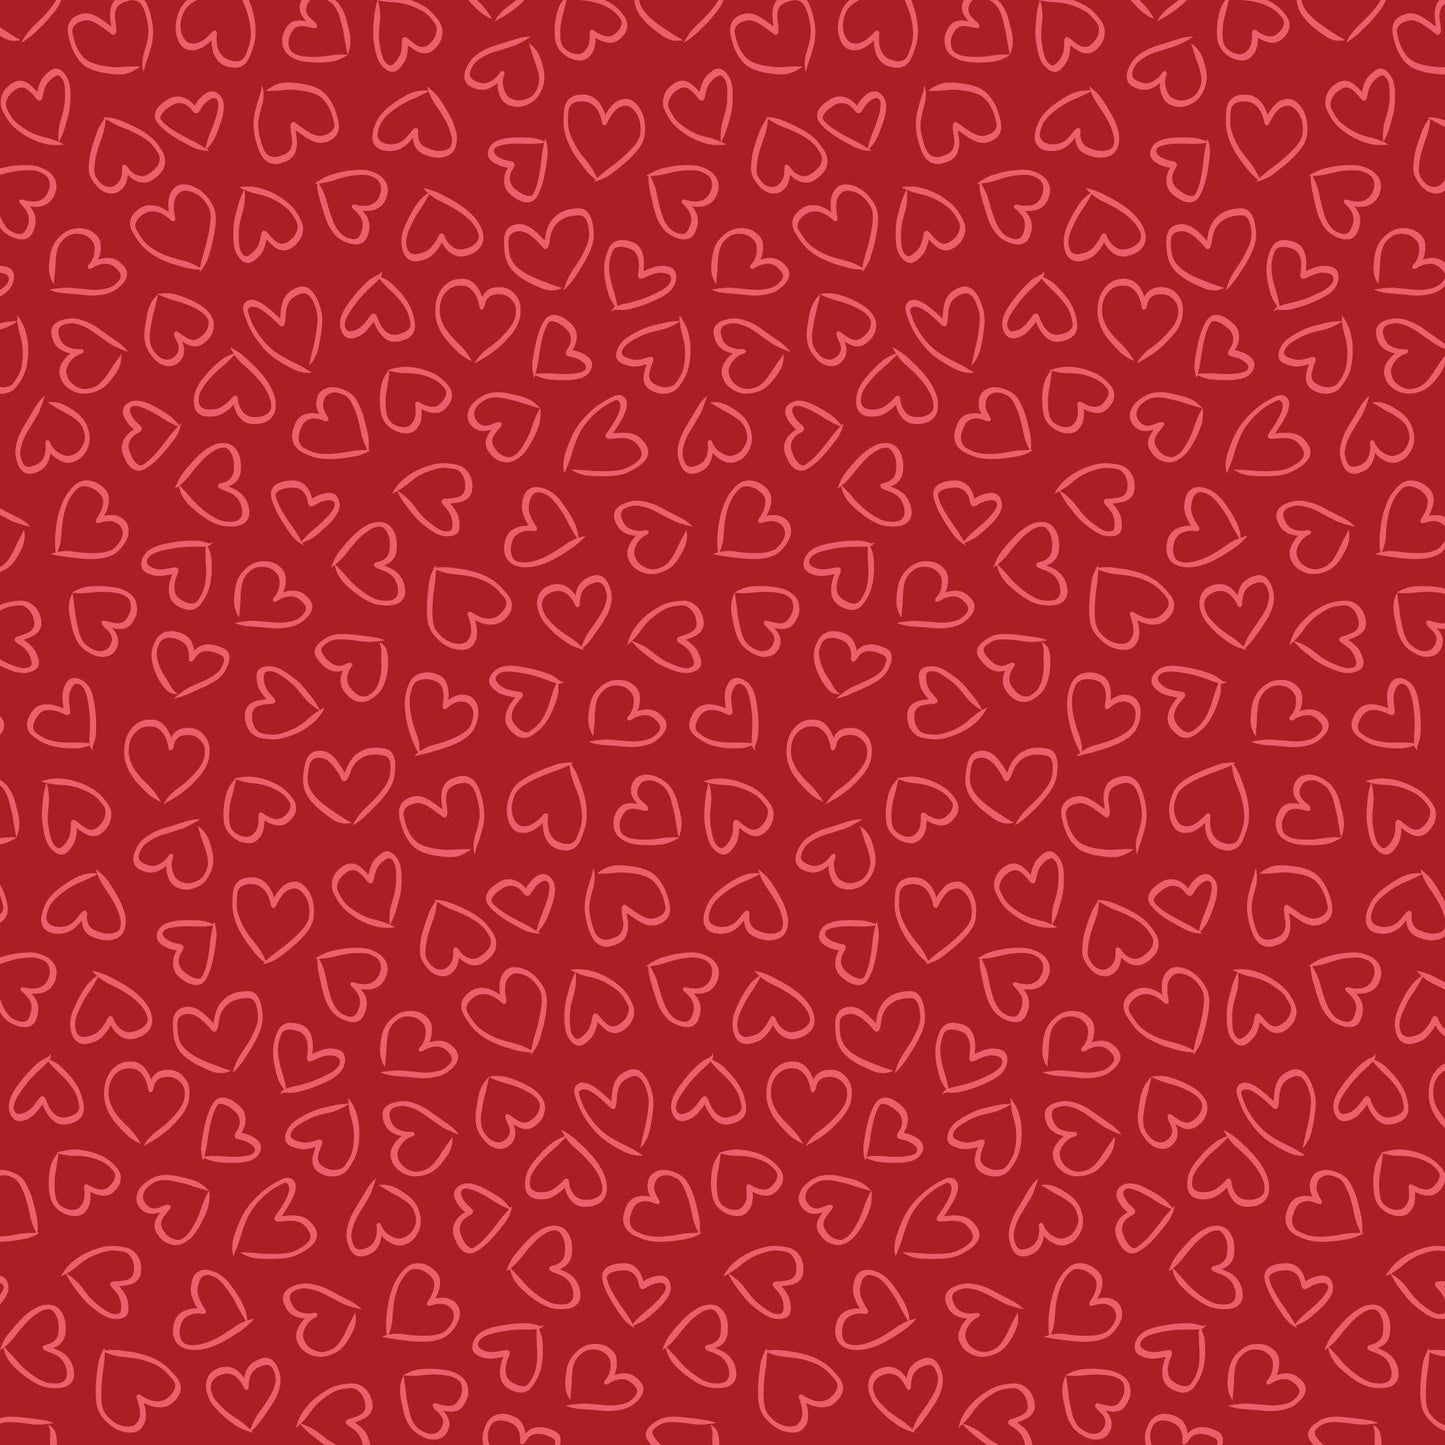 Hearts Drawing Gift Wrap